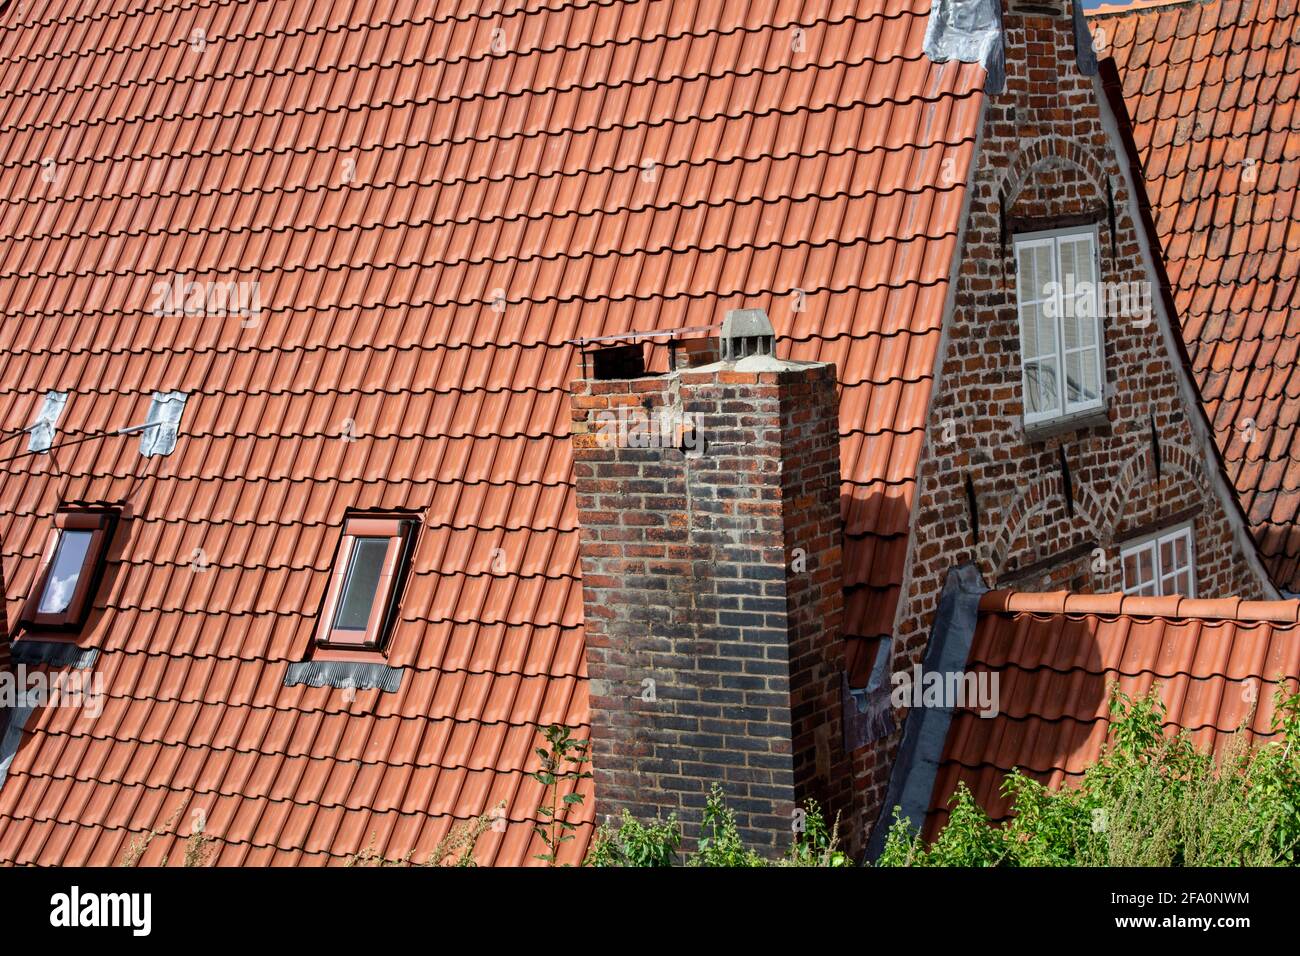 Closeup shot of a tile roof with the brick wall Stock Photo